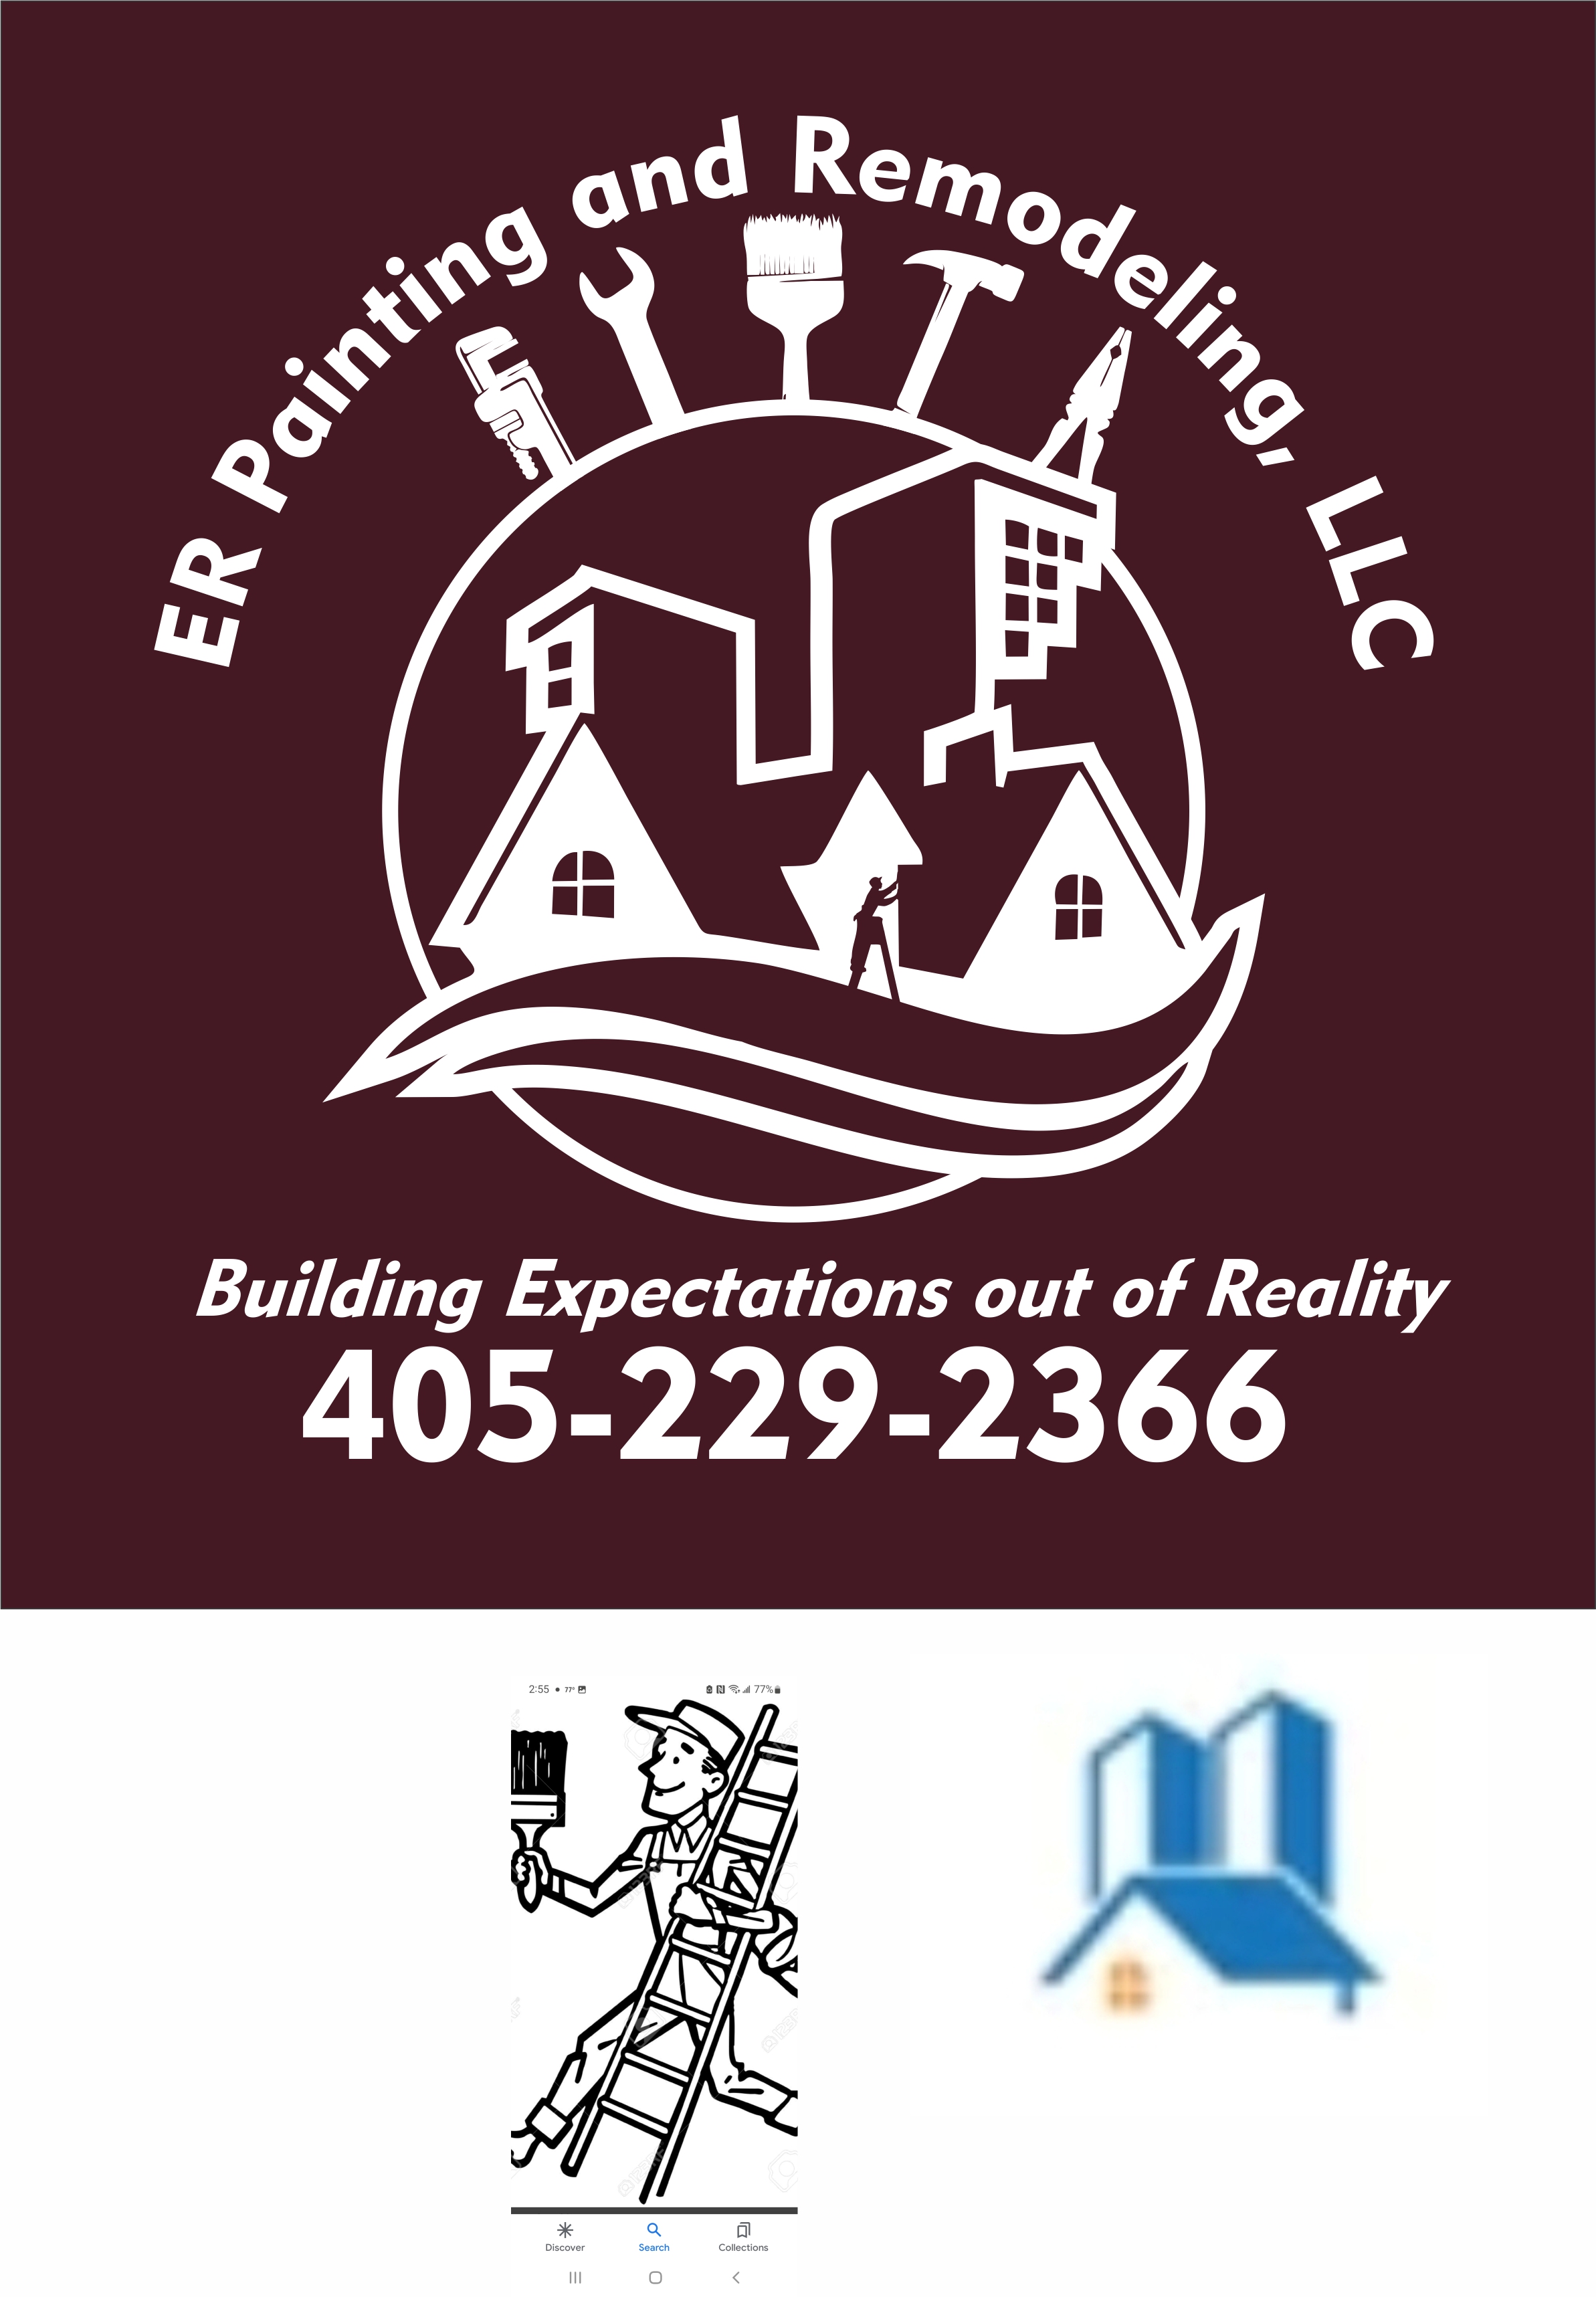 ER Local Painting and remodeling serviceLLc Logo